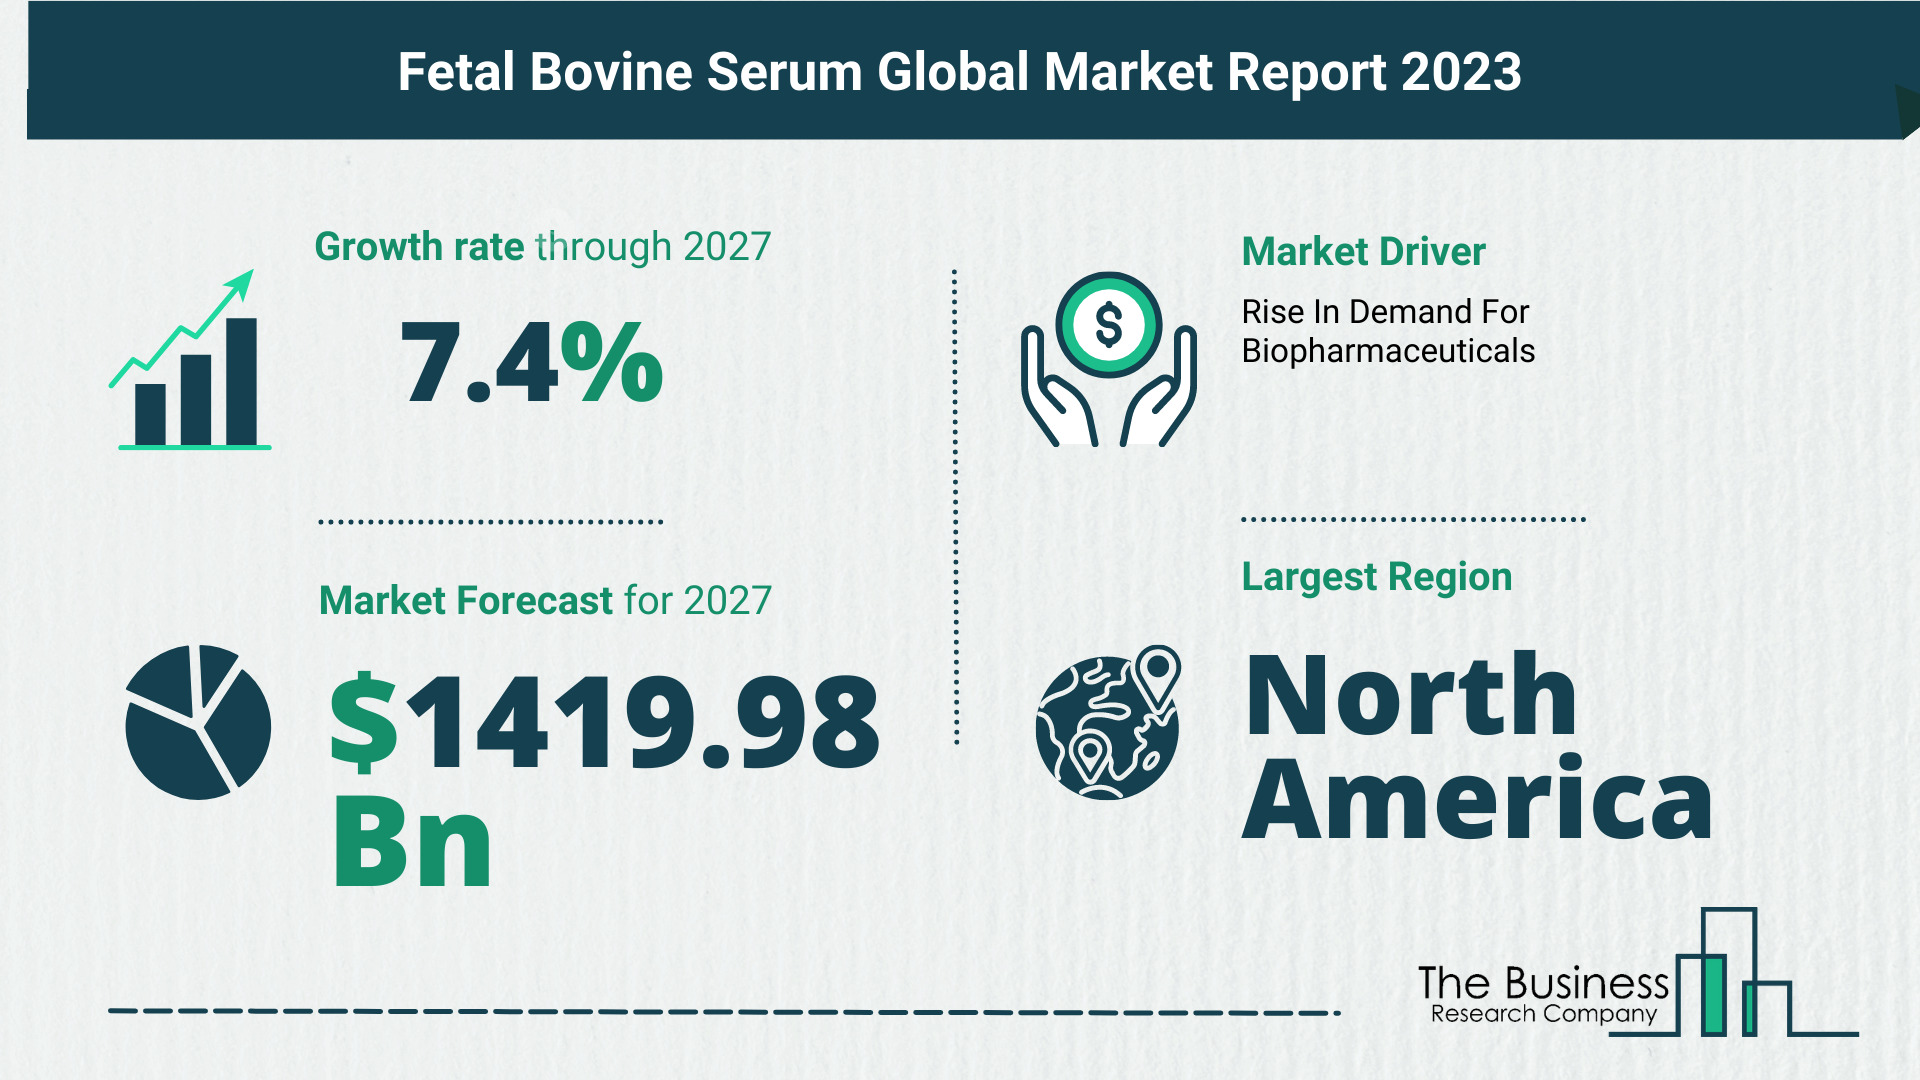 Anticipated Growth of the Fetal Bovine Serum Market from 2023 to 2032